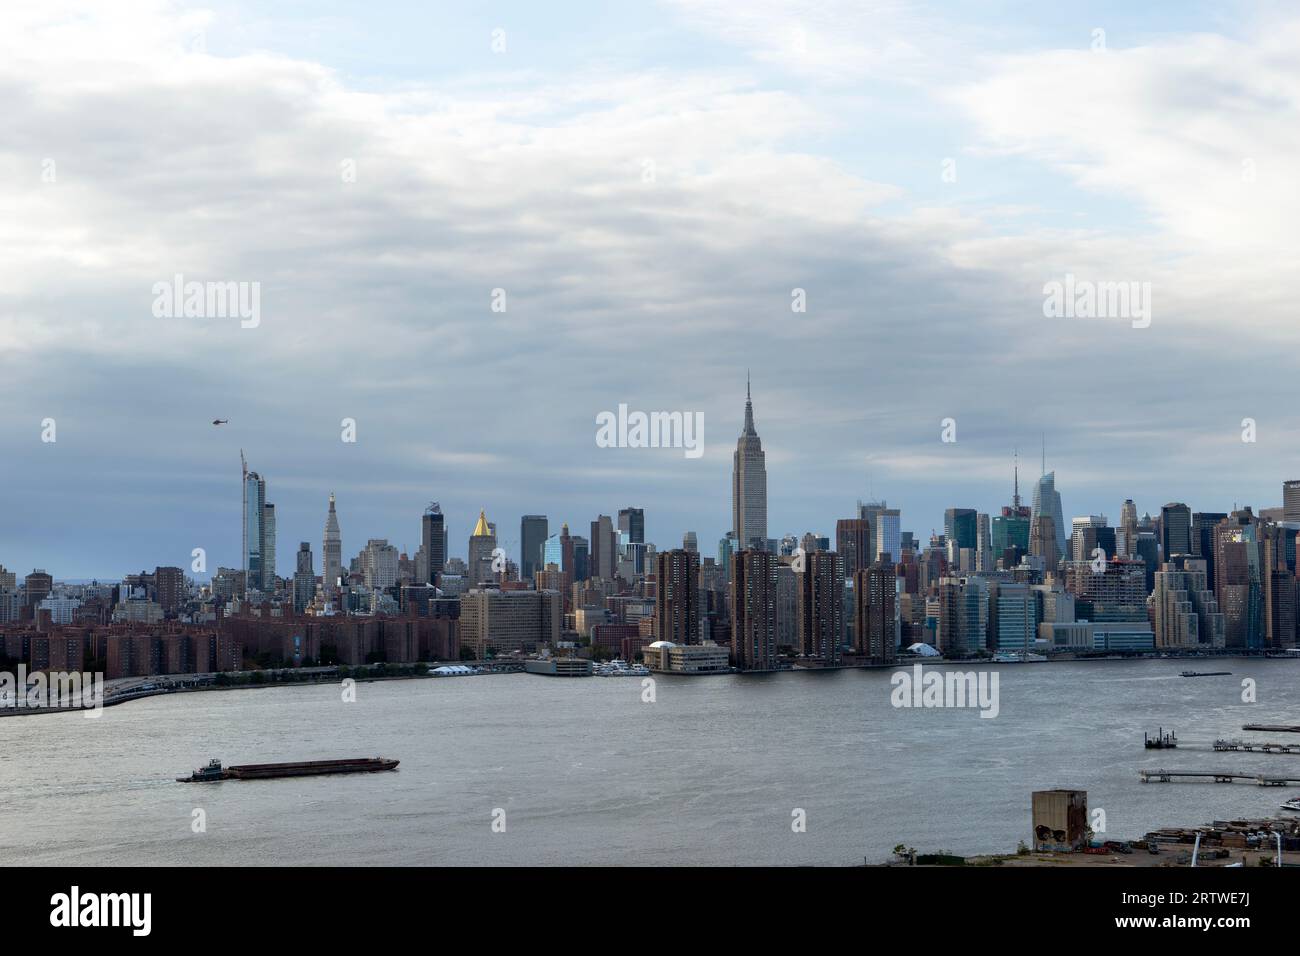 New York City skyline as seen across the East River in Brooklyn Stock Photo